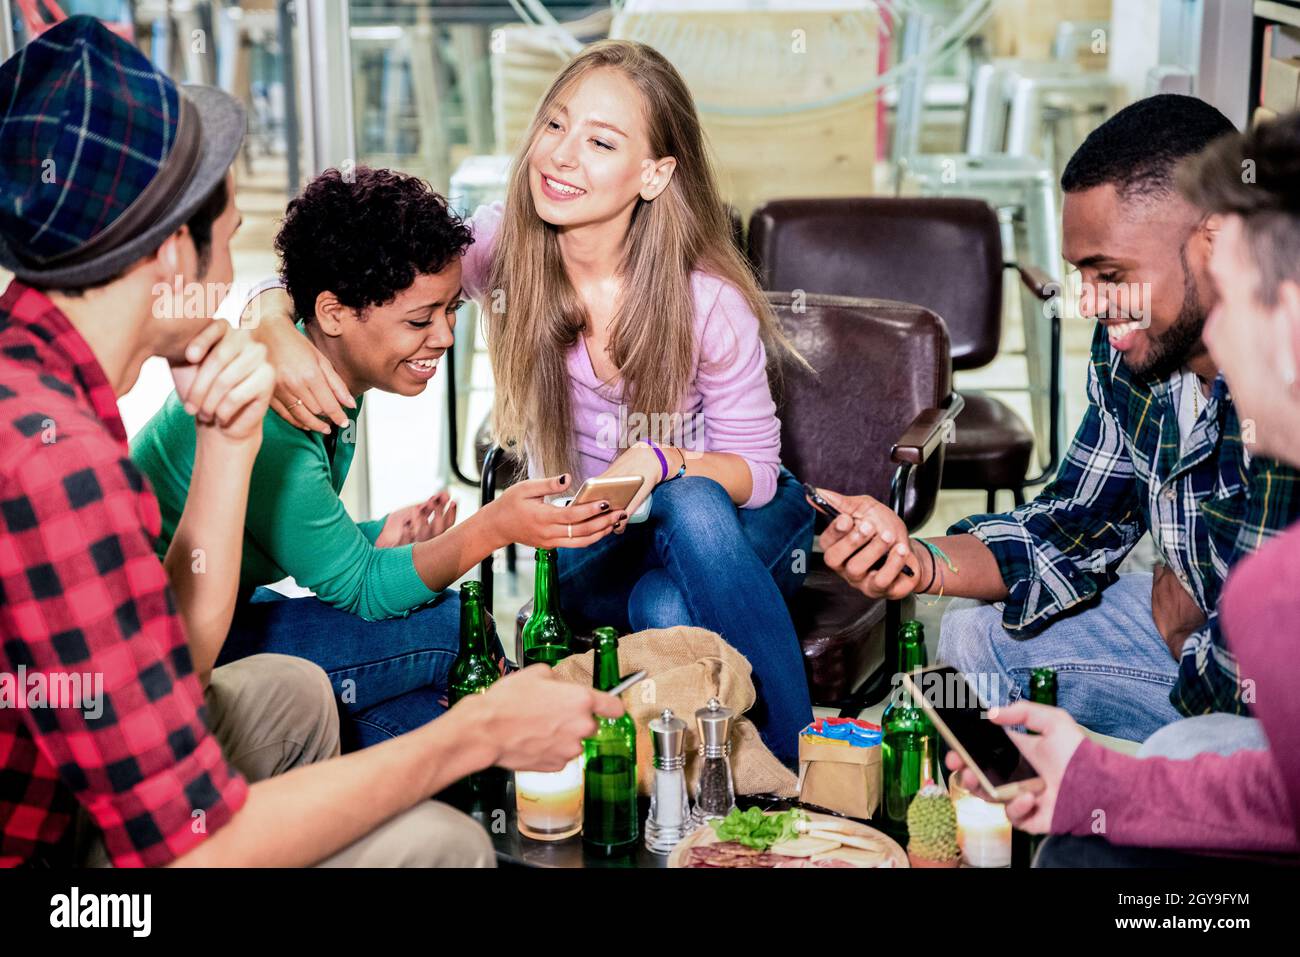 Multiracial friends group drinking beer and having fun with phones at cocktail bar restaurant - Friendship concept with people enjoying time together Stock Photo